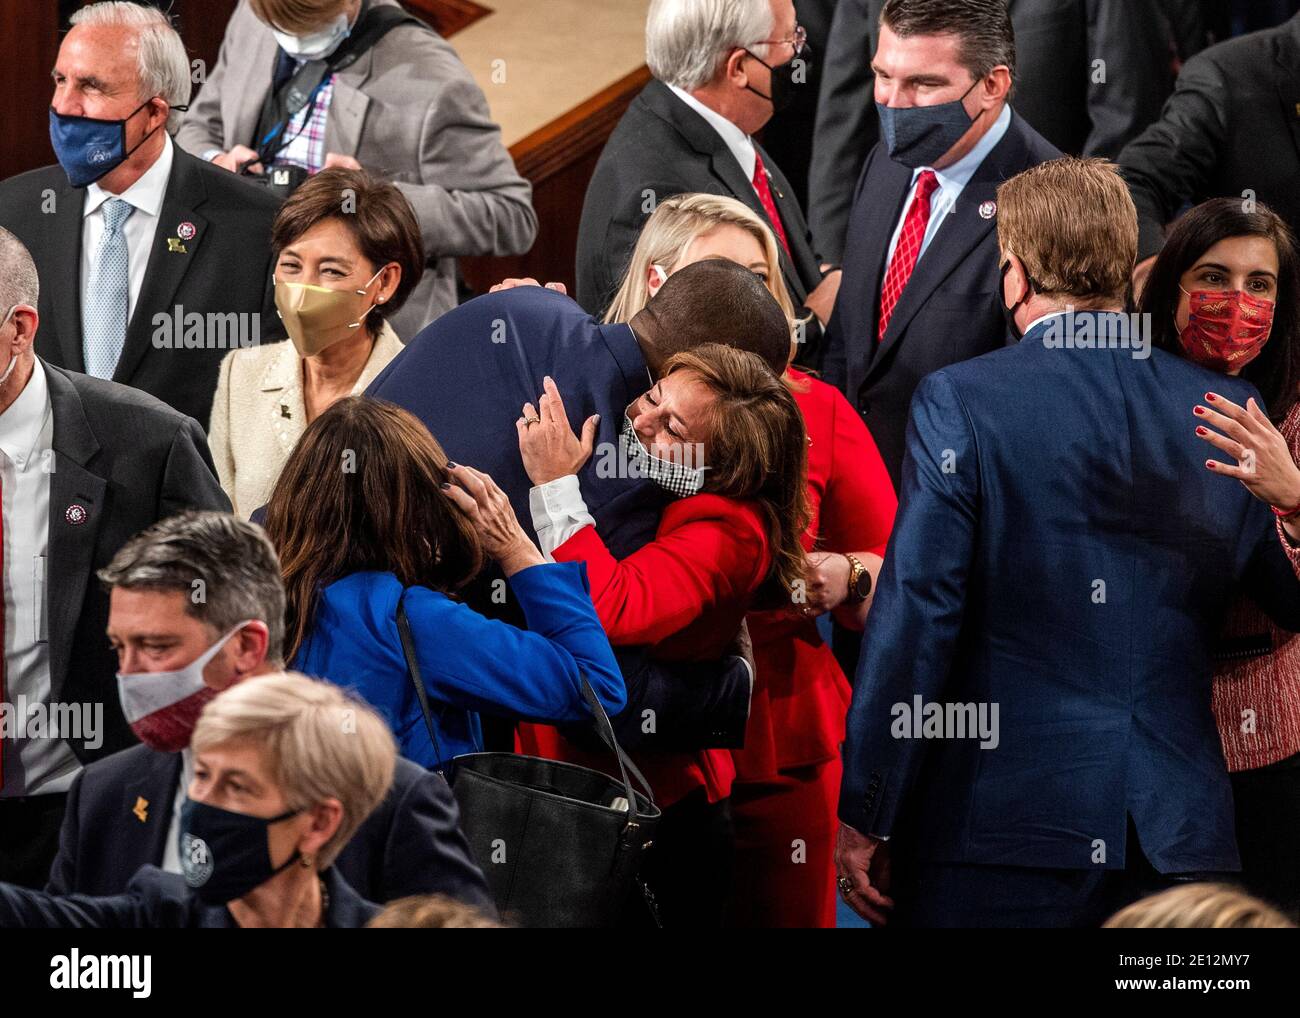 Newly sworn in House members mingle and congratulate each other on the opening day of the 117th Congress at the at the U.S. Capitol in Washington, DC on January 03, 2021. Credit: Bill O'Leary/Pool via CNP /MediaPunch Stock Photo